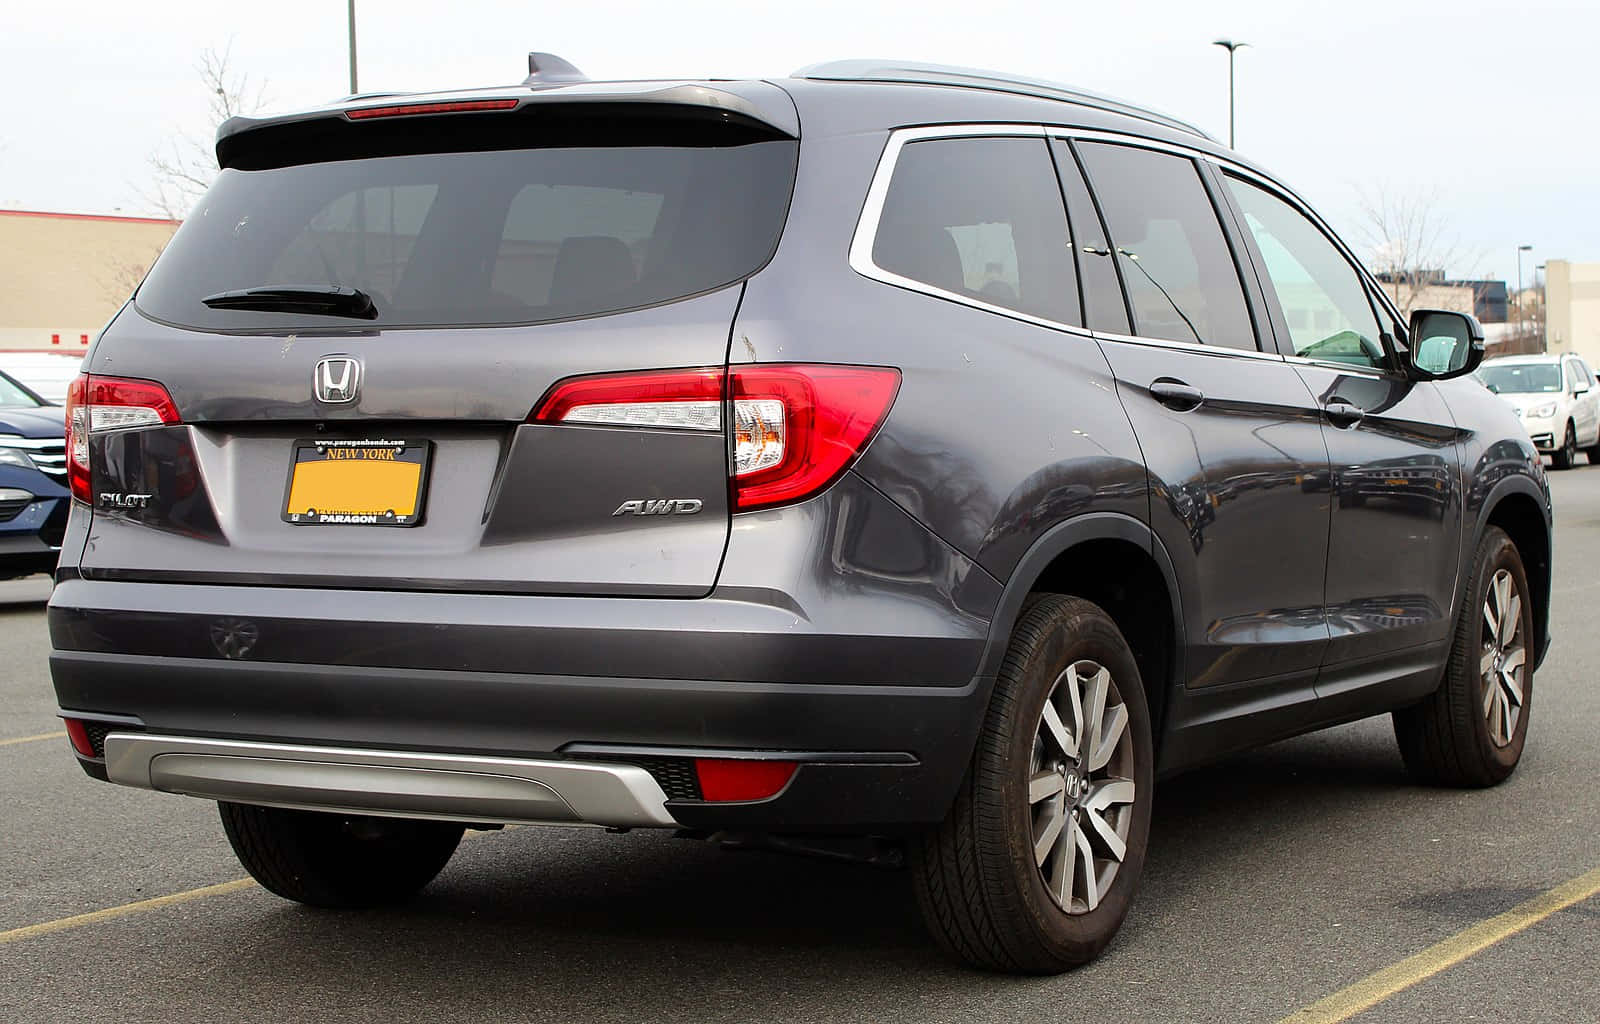 A Gray Honda Pilot Parked In A Parking Lot